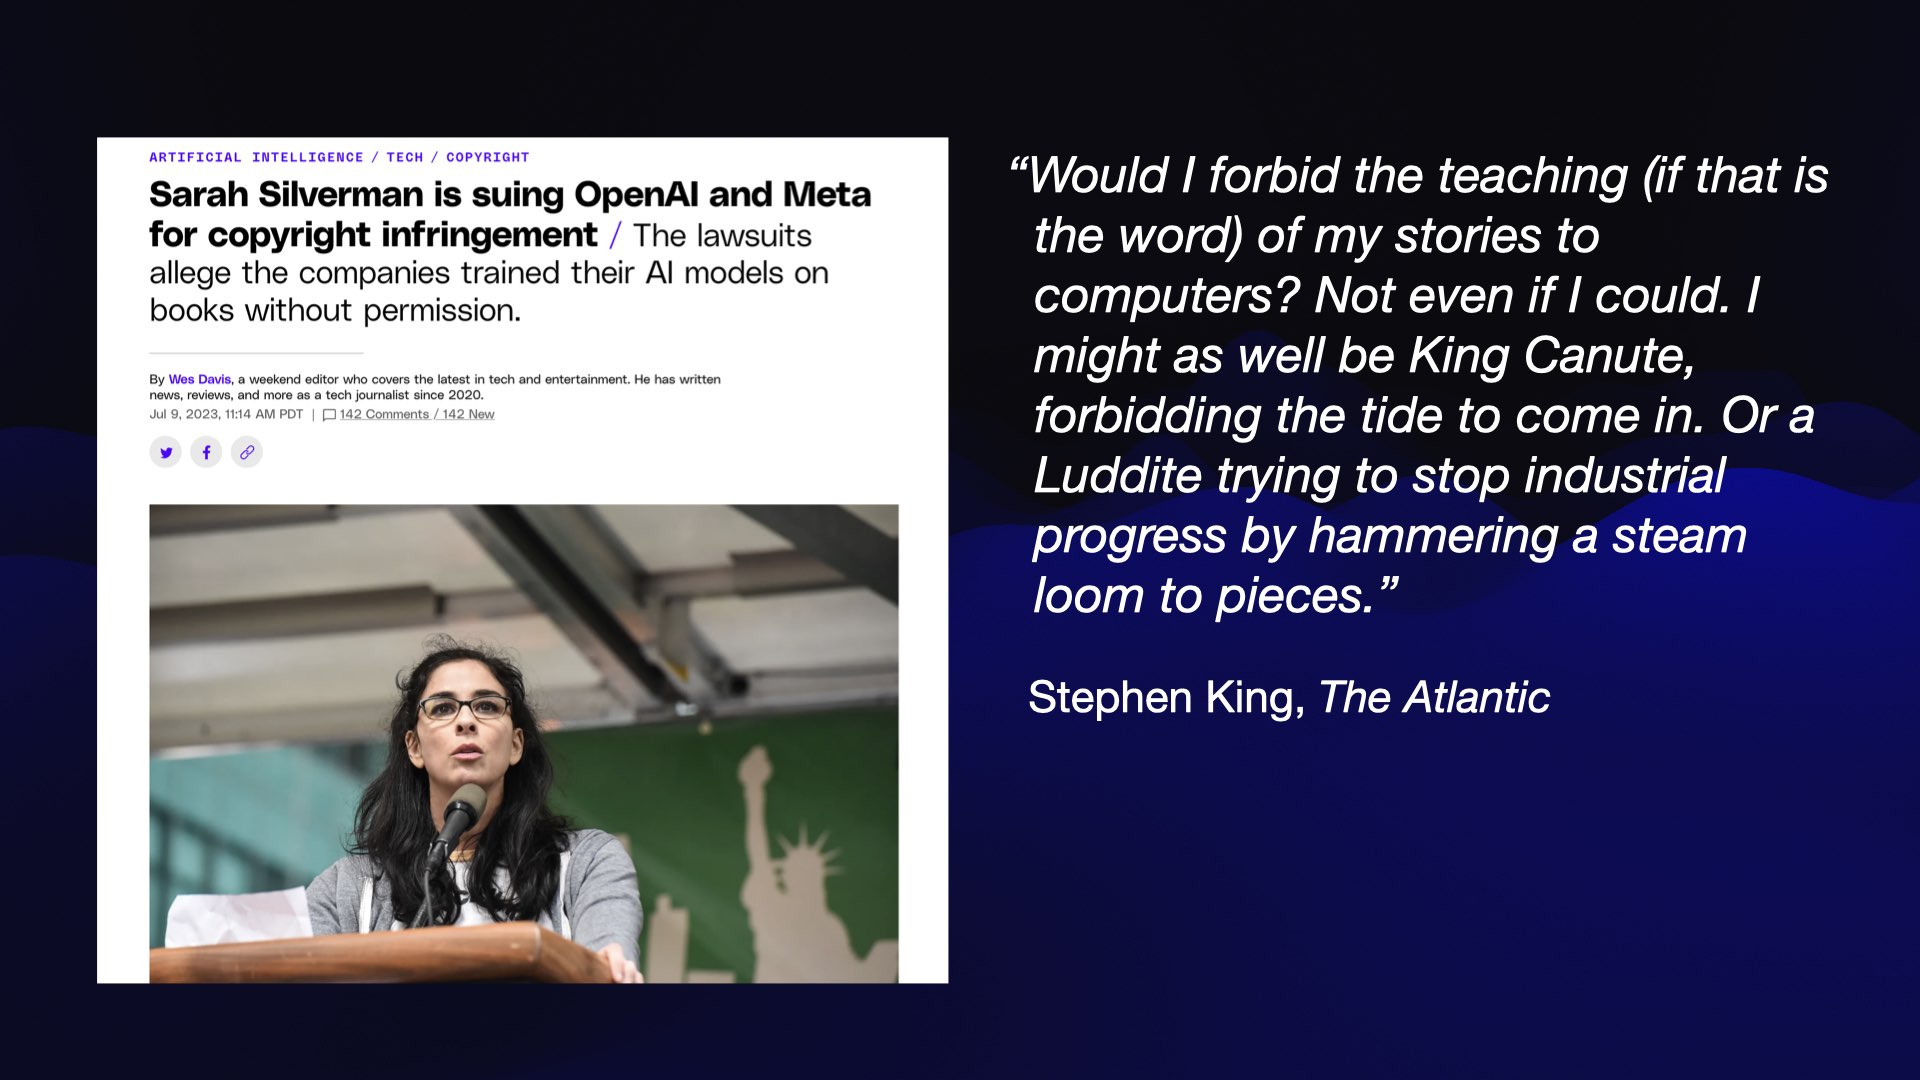 On the left: a screenshot from the Verge of a story titled Sarah Silverman is suing OpenAI and Meta for copyright infringement / The lawsuits allege the companies trained their AI models on books without permission.  On the right, a quote from Stephen King in the Atlantic: Would I forbid the teaching (if that is the word) of my stories to computers? Not even if I could. I might as well be King Canute, forbidding the tide to come in. Or a Luddite trying to stop industrial progress by hammering a steam loom to pieces.